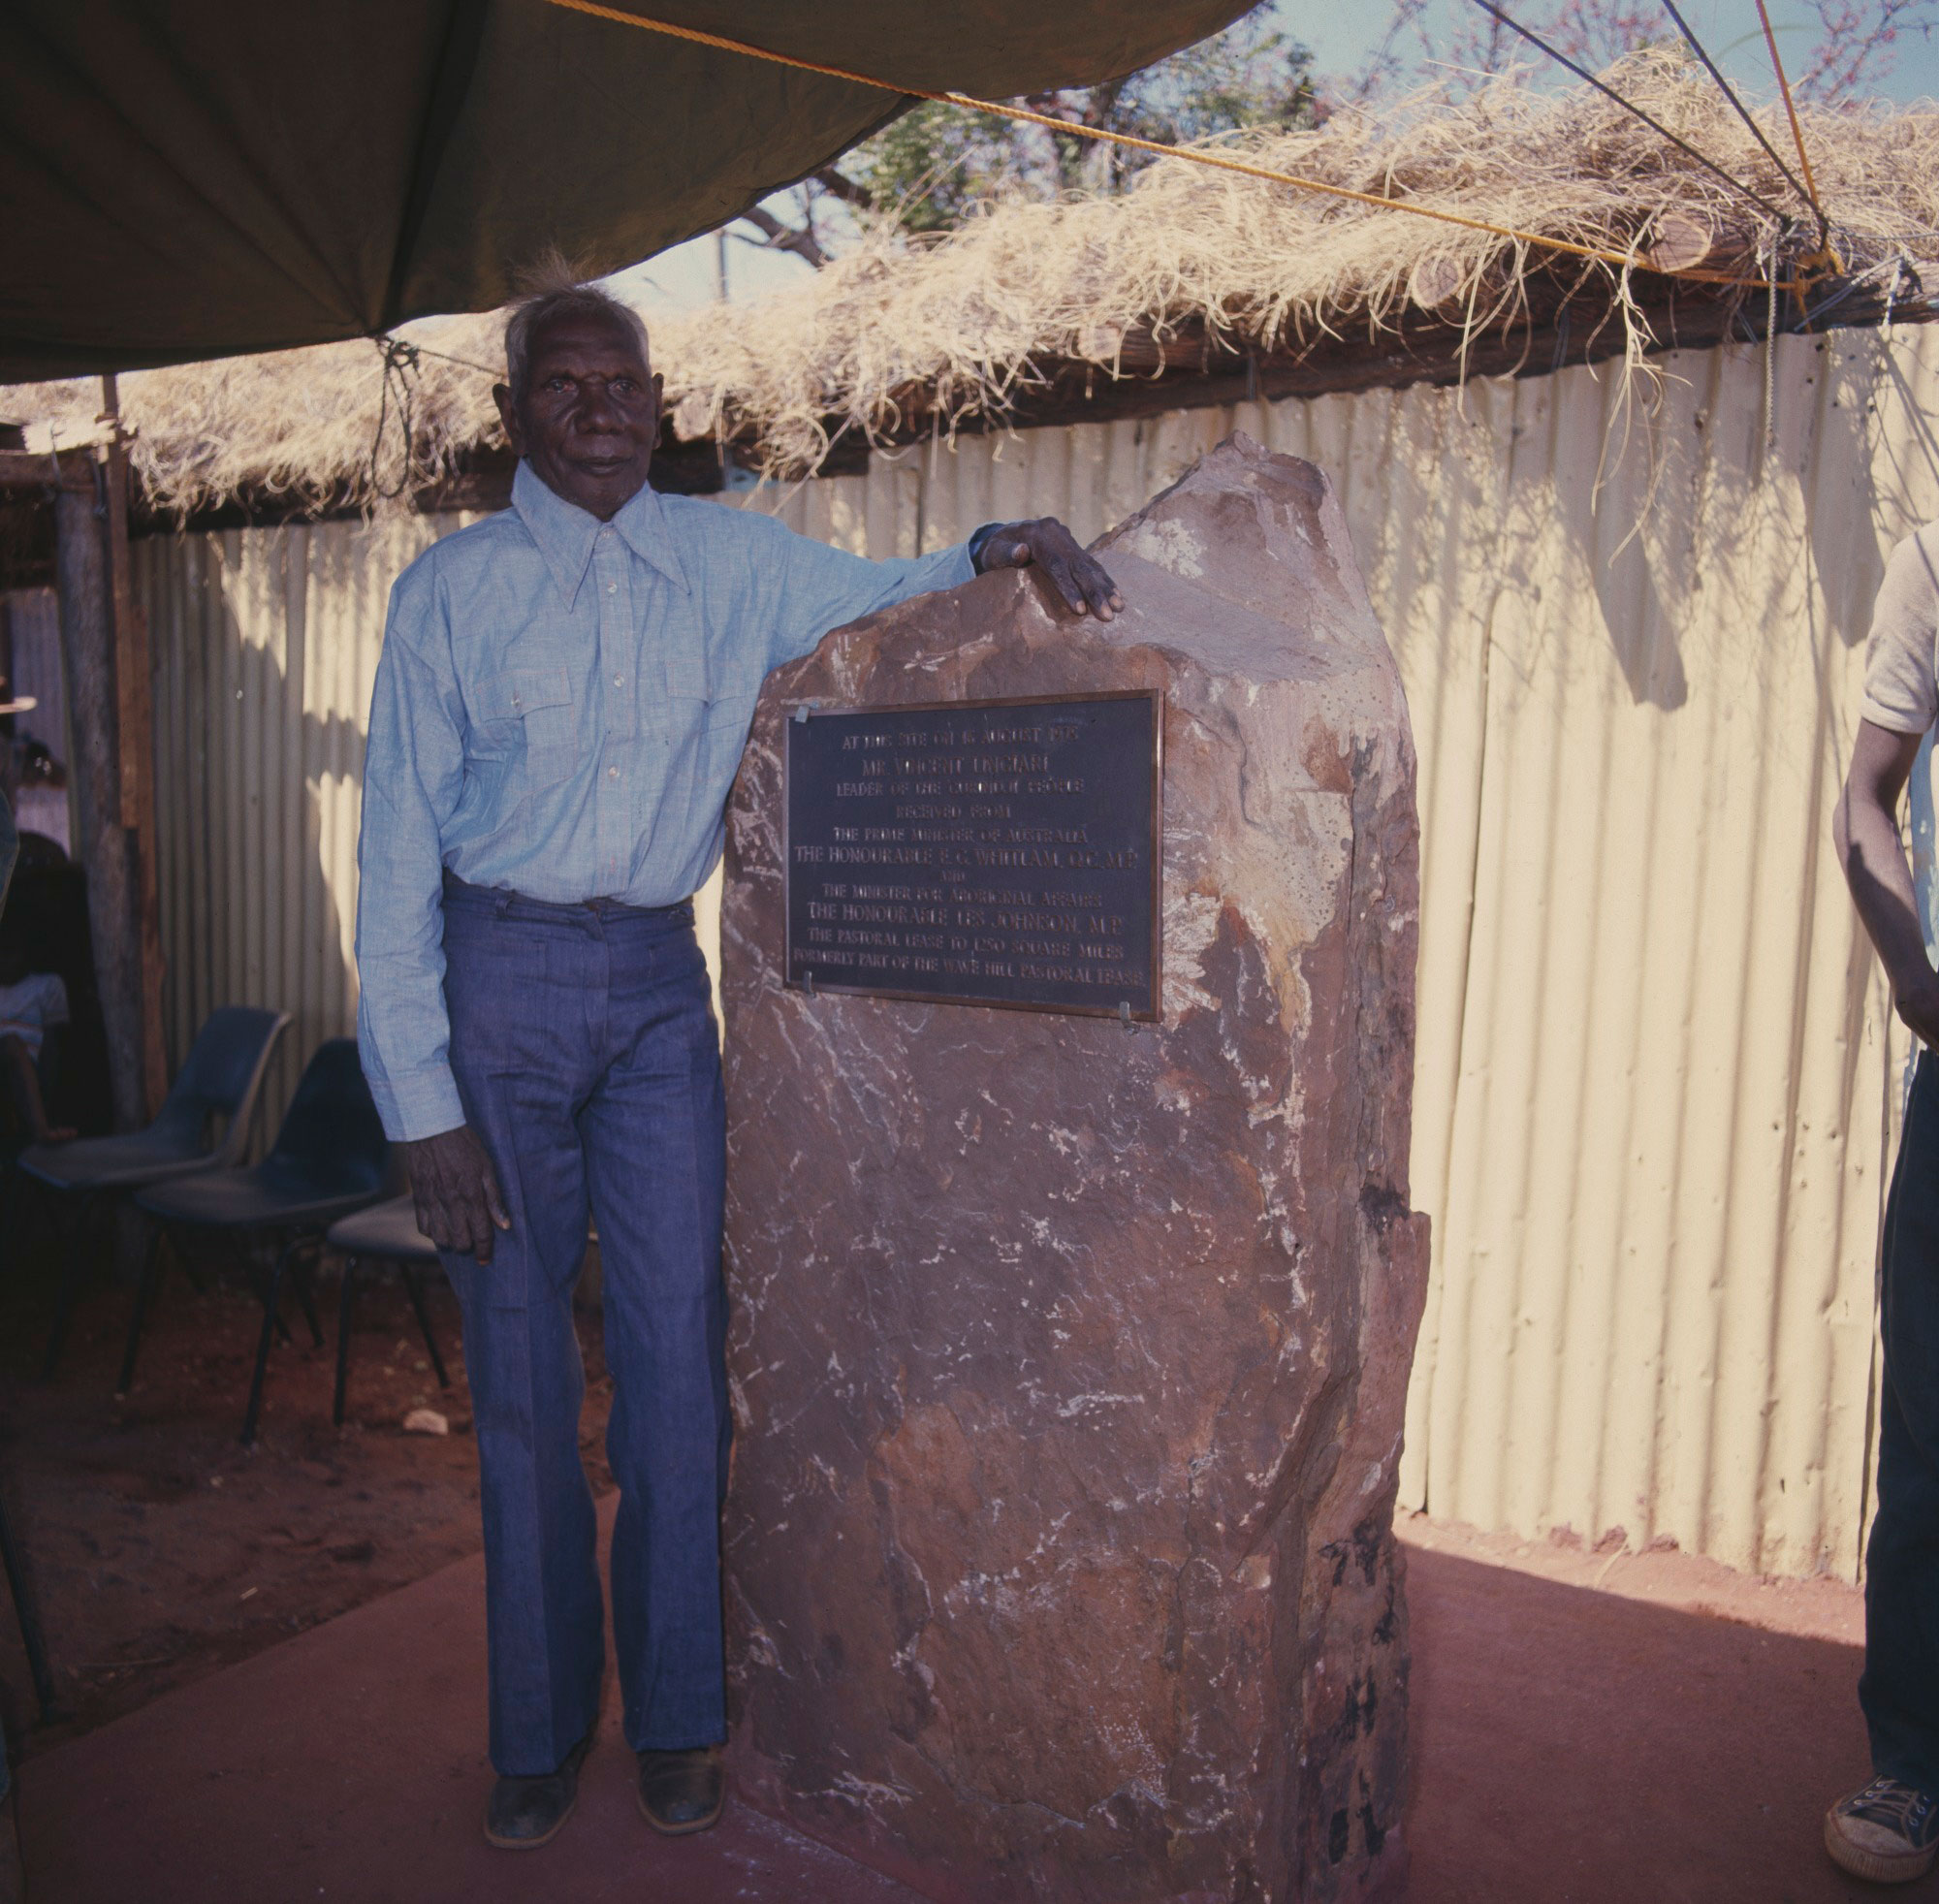 Vincent Lingiari beside a plaque marking the handing over of the lease, in Wattie Creek, Northern Territory, 16 August 1975.